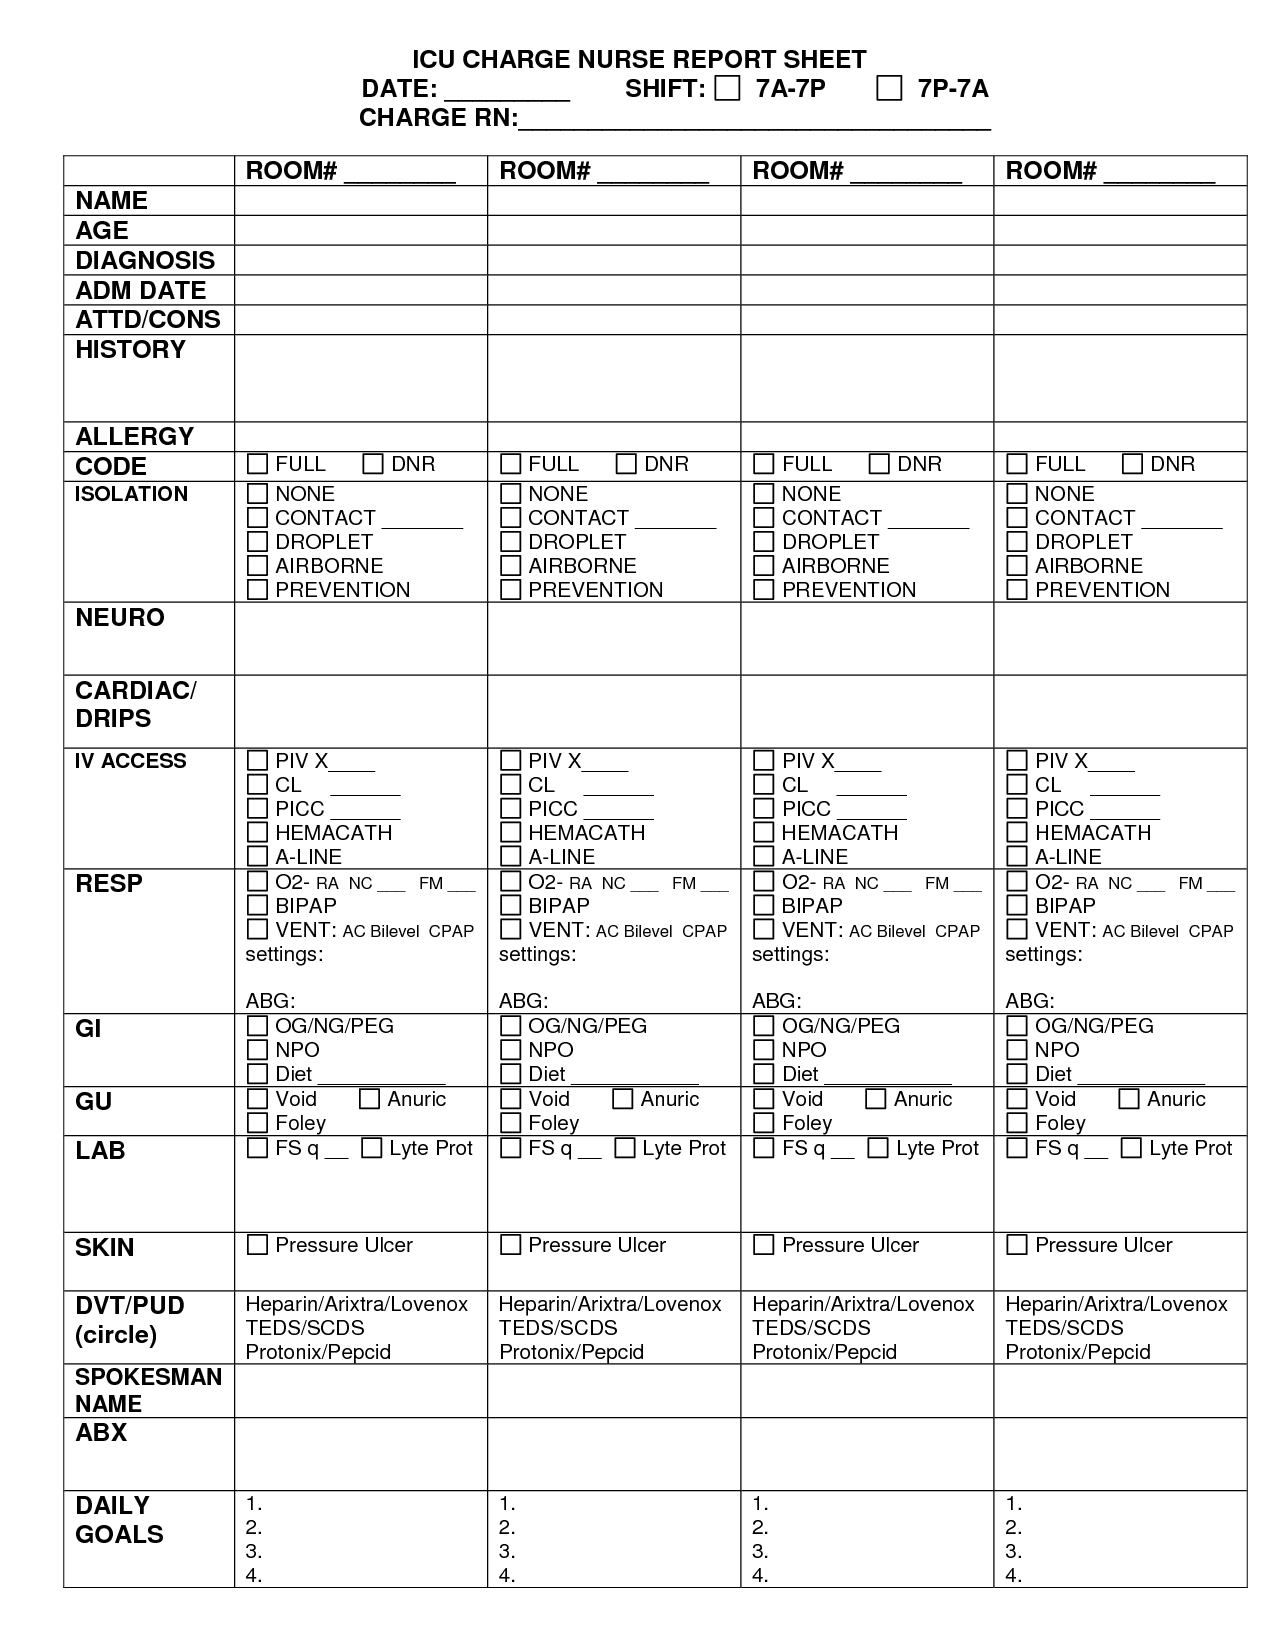 Charge Nurse Report Sheet Template - Riset